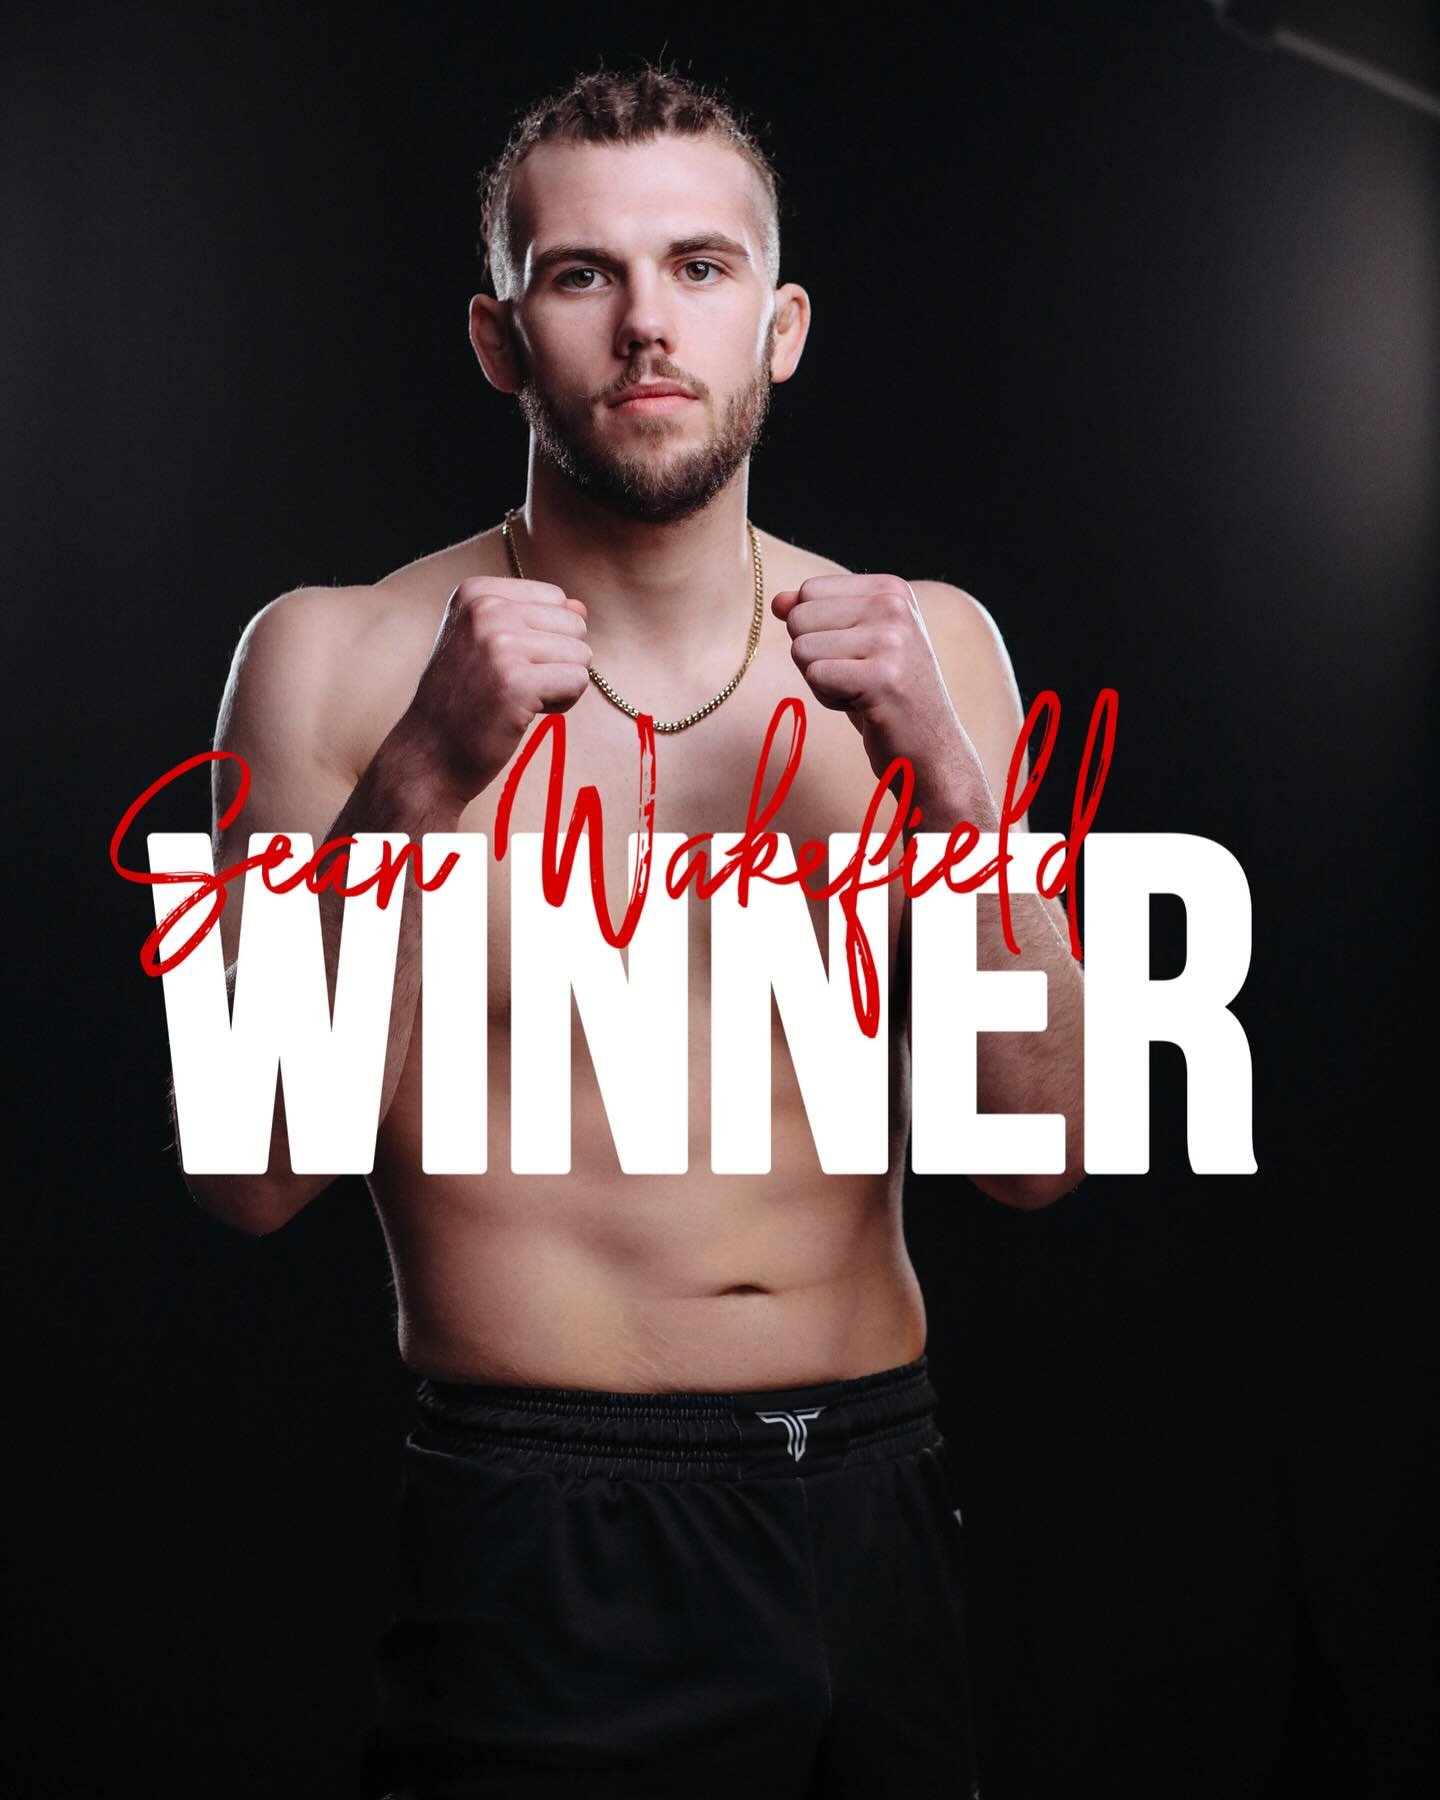 @swakefield0 wins by tap out by an arm bar in the first round!